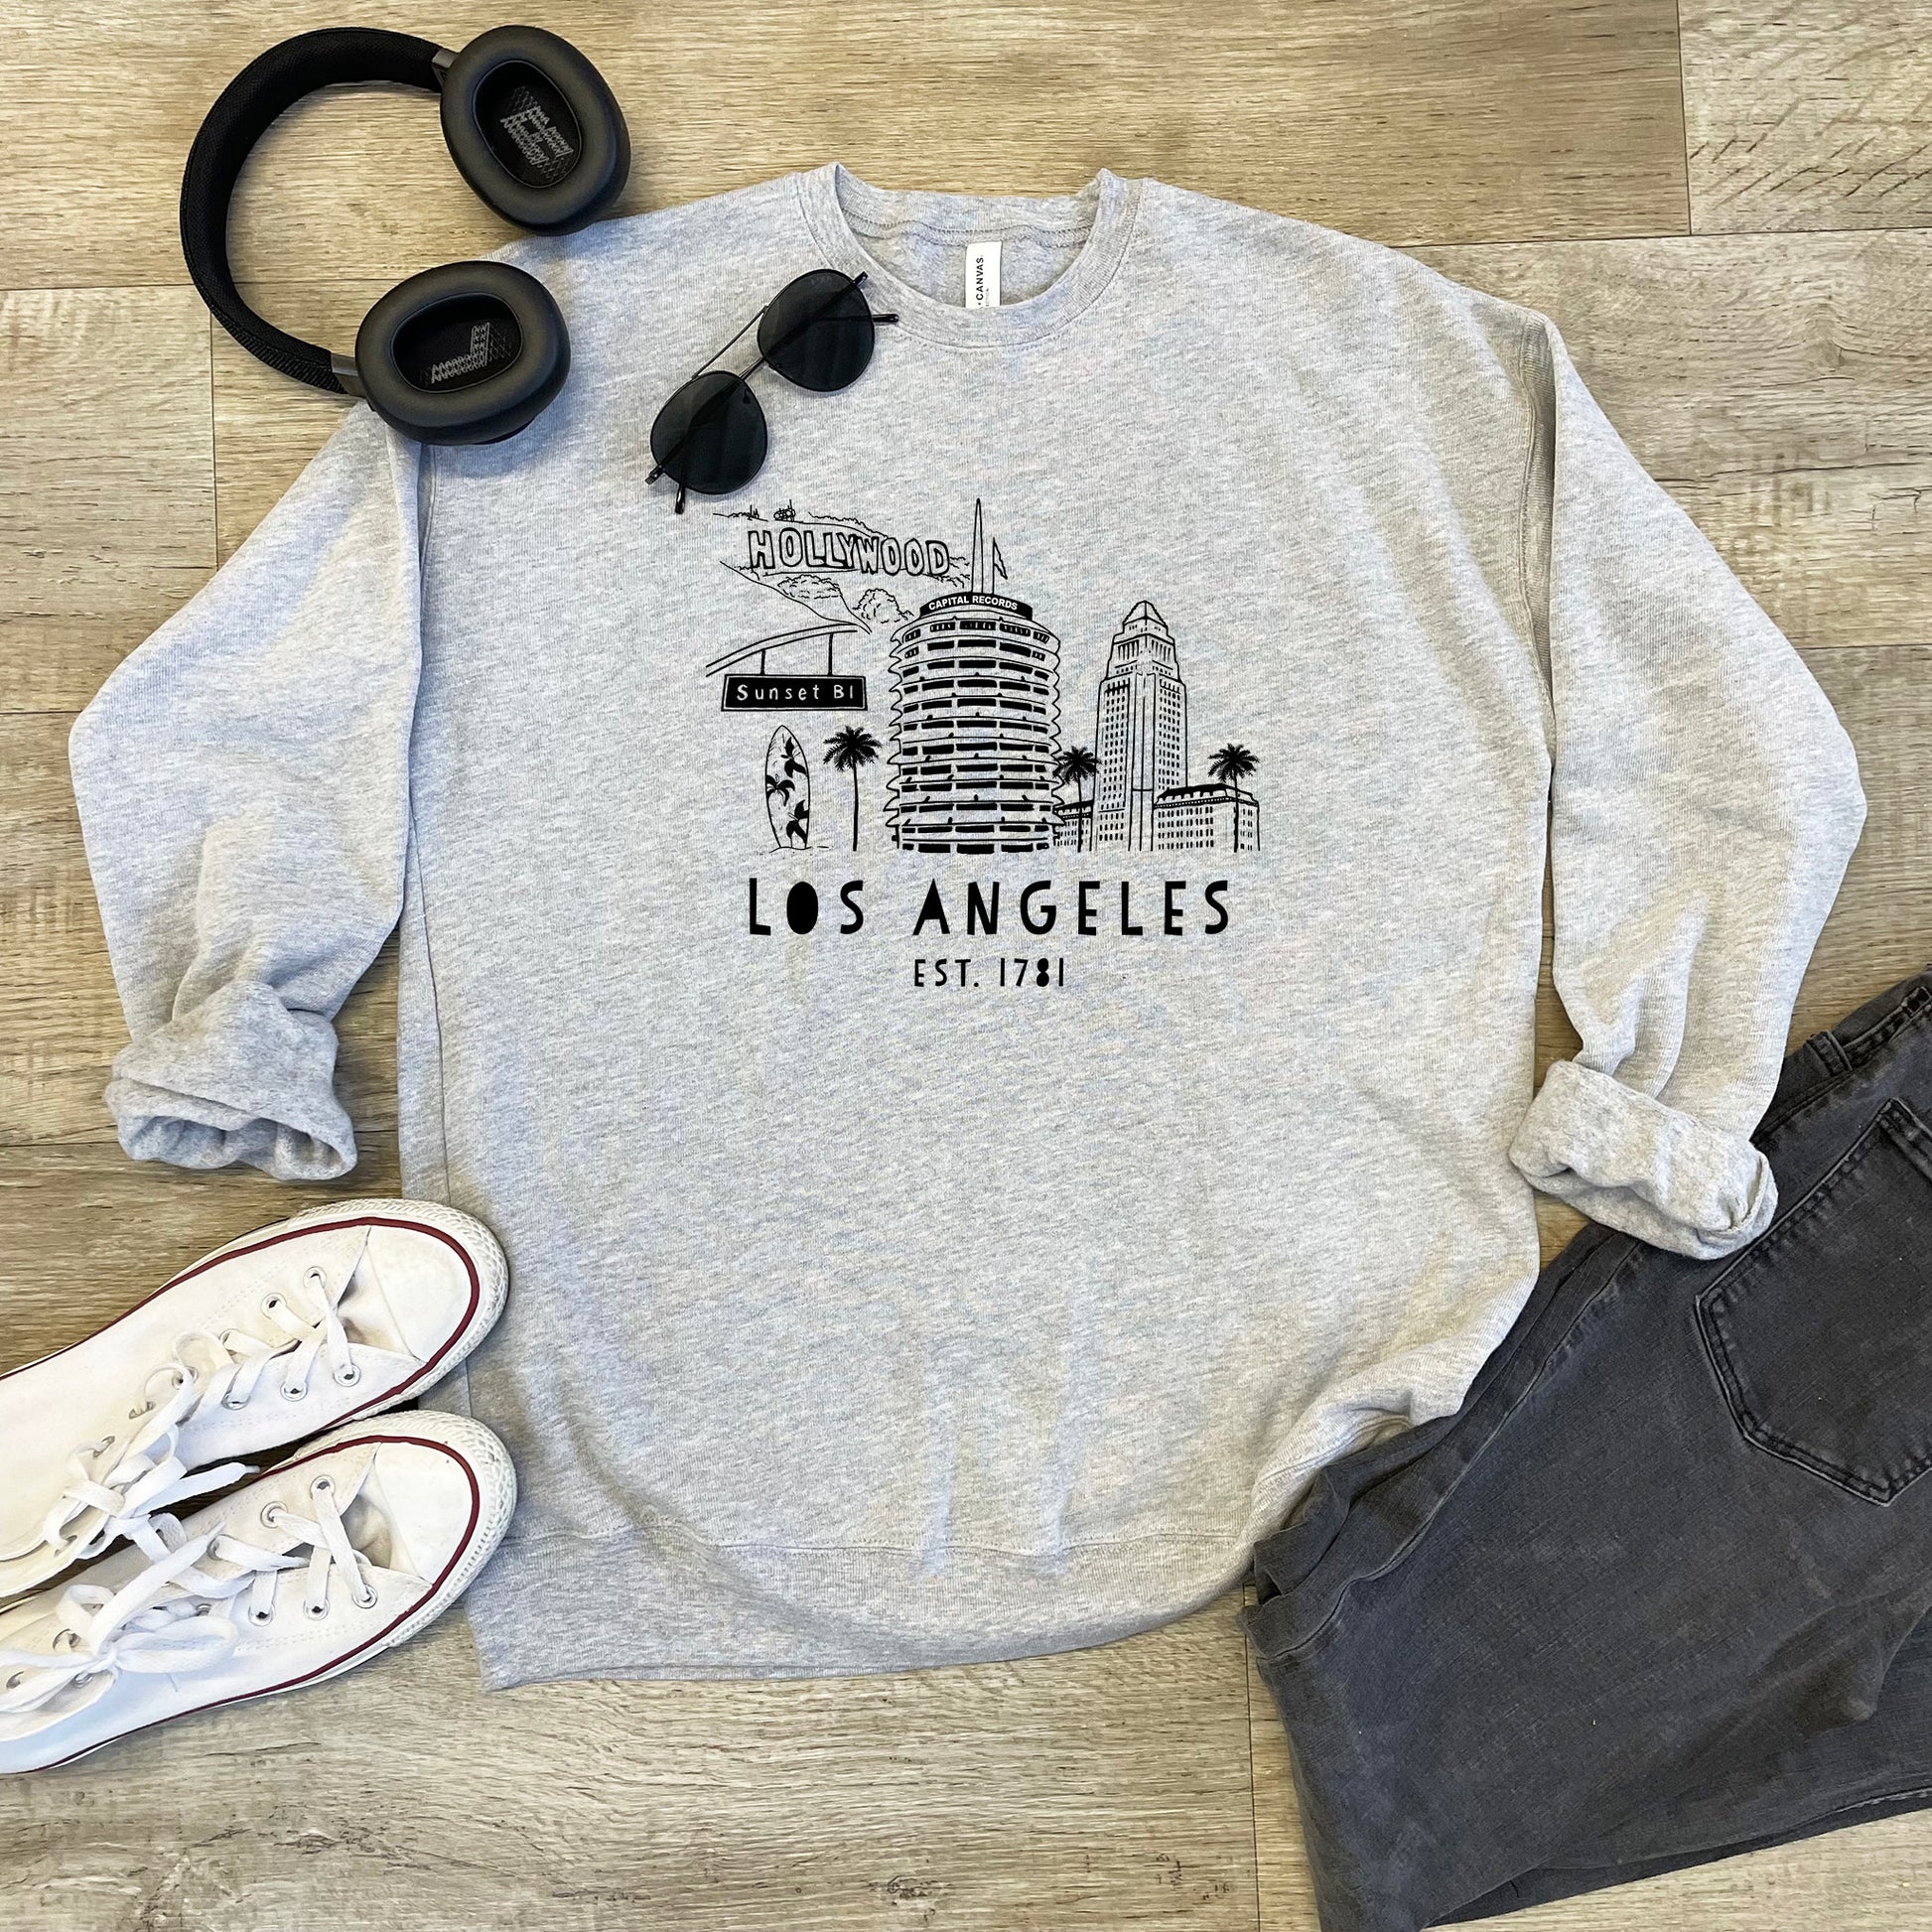 a sweatshirt with headphones, headphones, and a pair of jeans